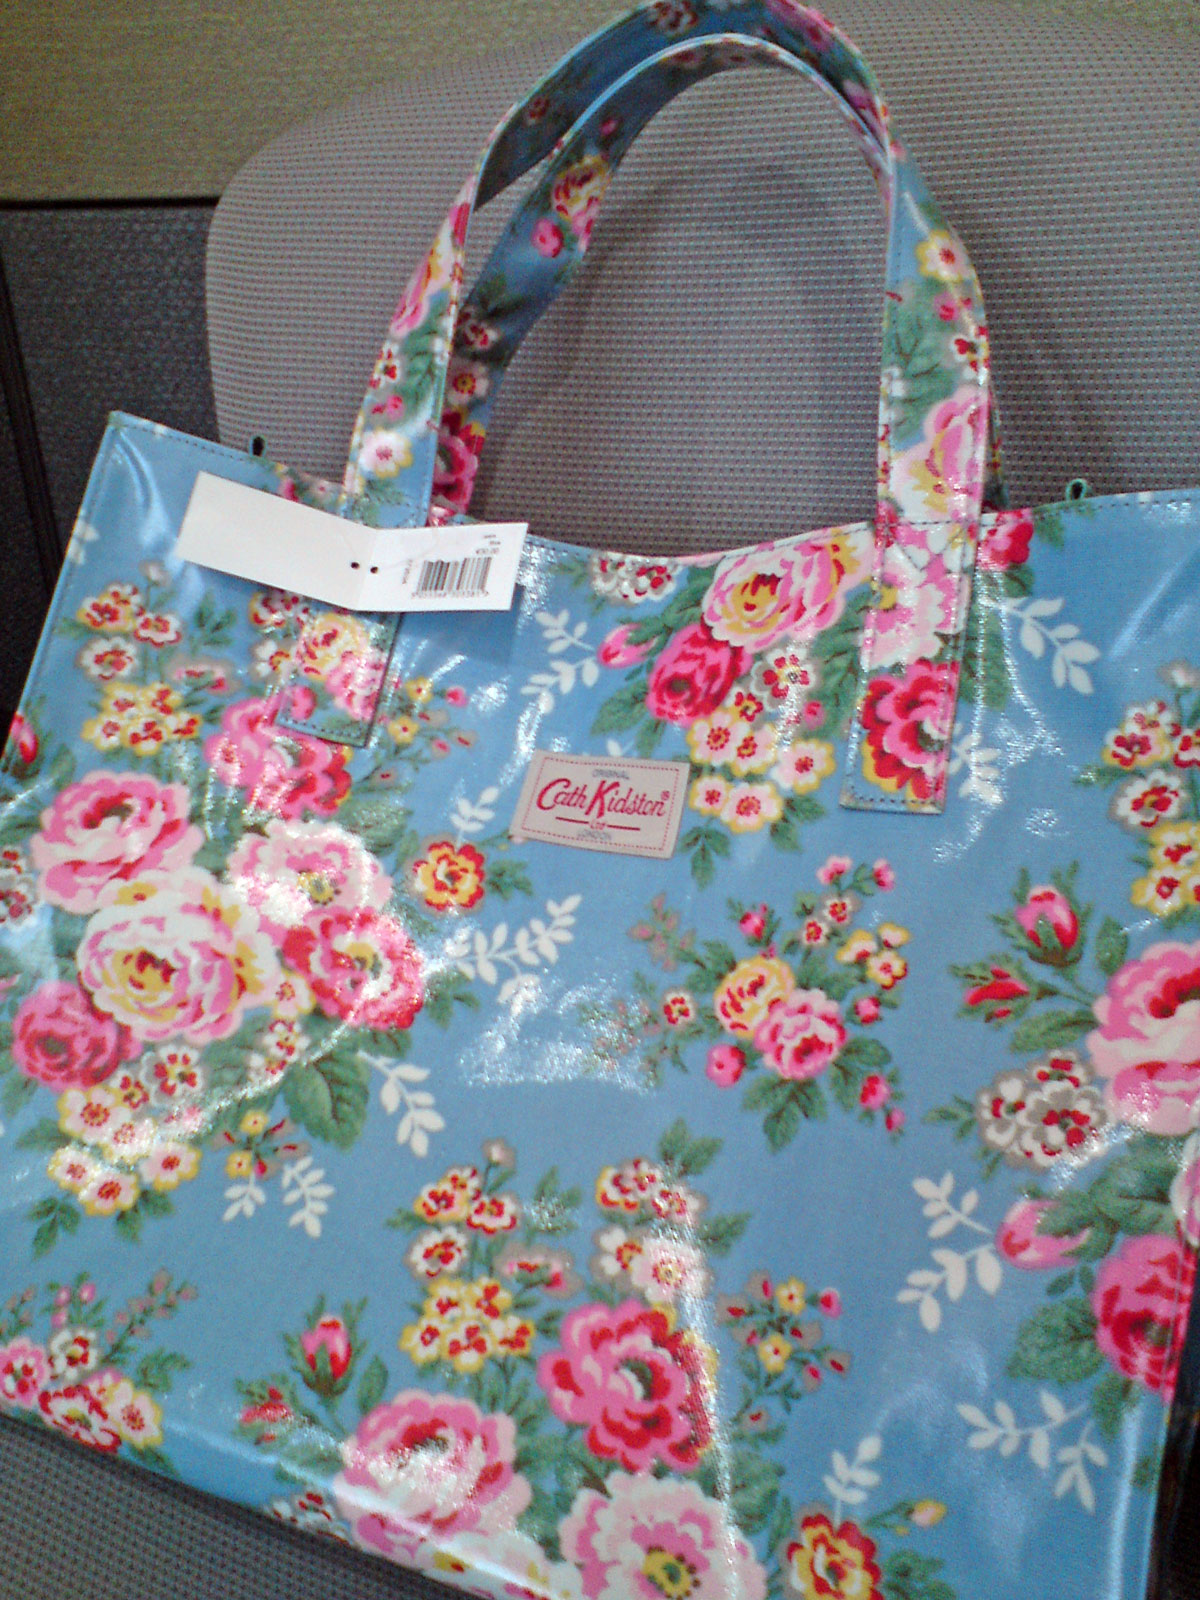 Cath Kidston Spot Carry All Bag | The 